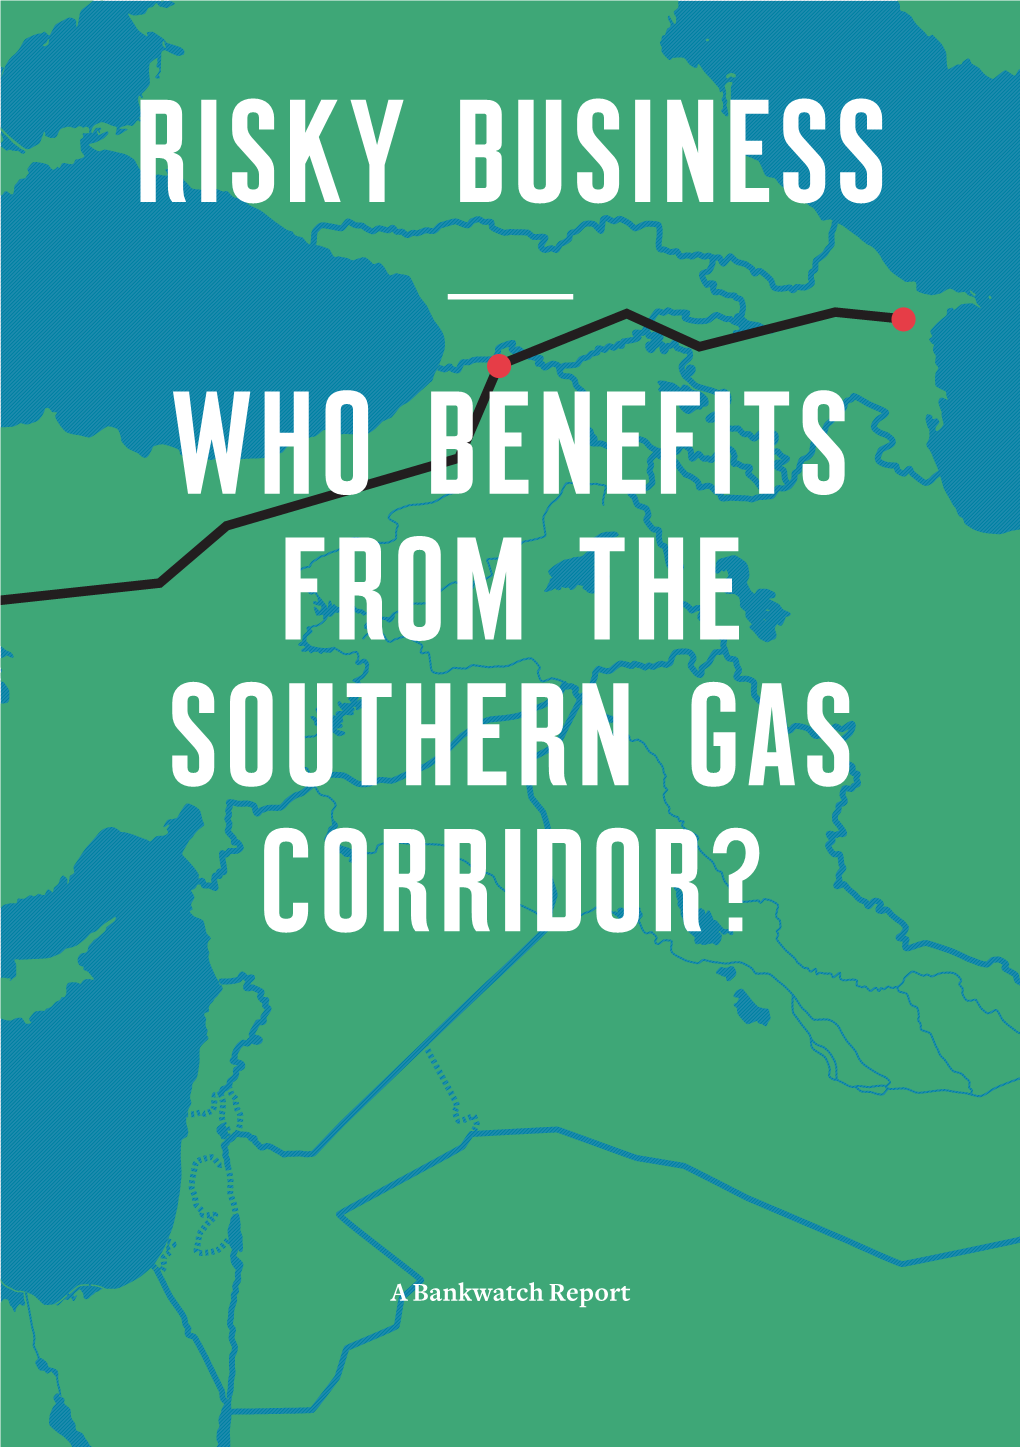 Risky Business — Who Benefits from the Southern Gas Corridor?